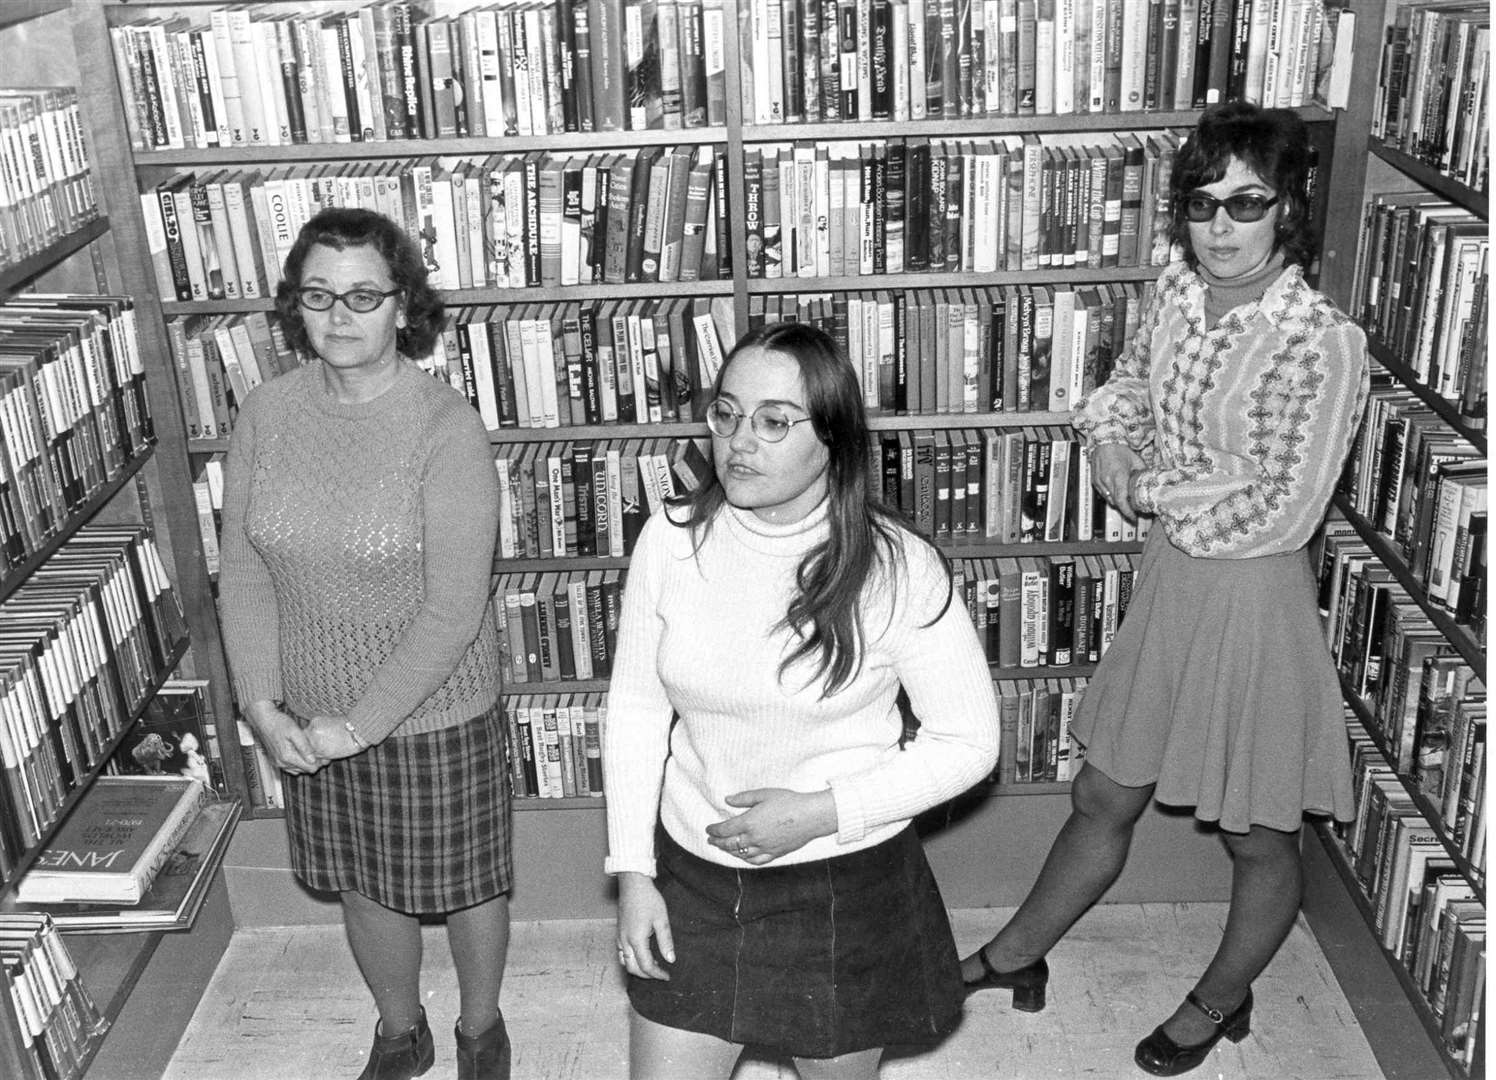 Inside Staplehurst Library in February 1974 - the three librarians are Joan Hartly, left, with Ann Waters and Georgina Coleman